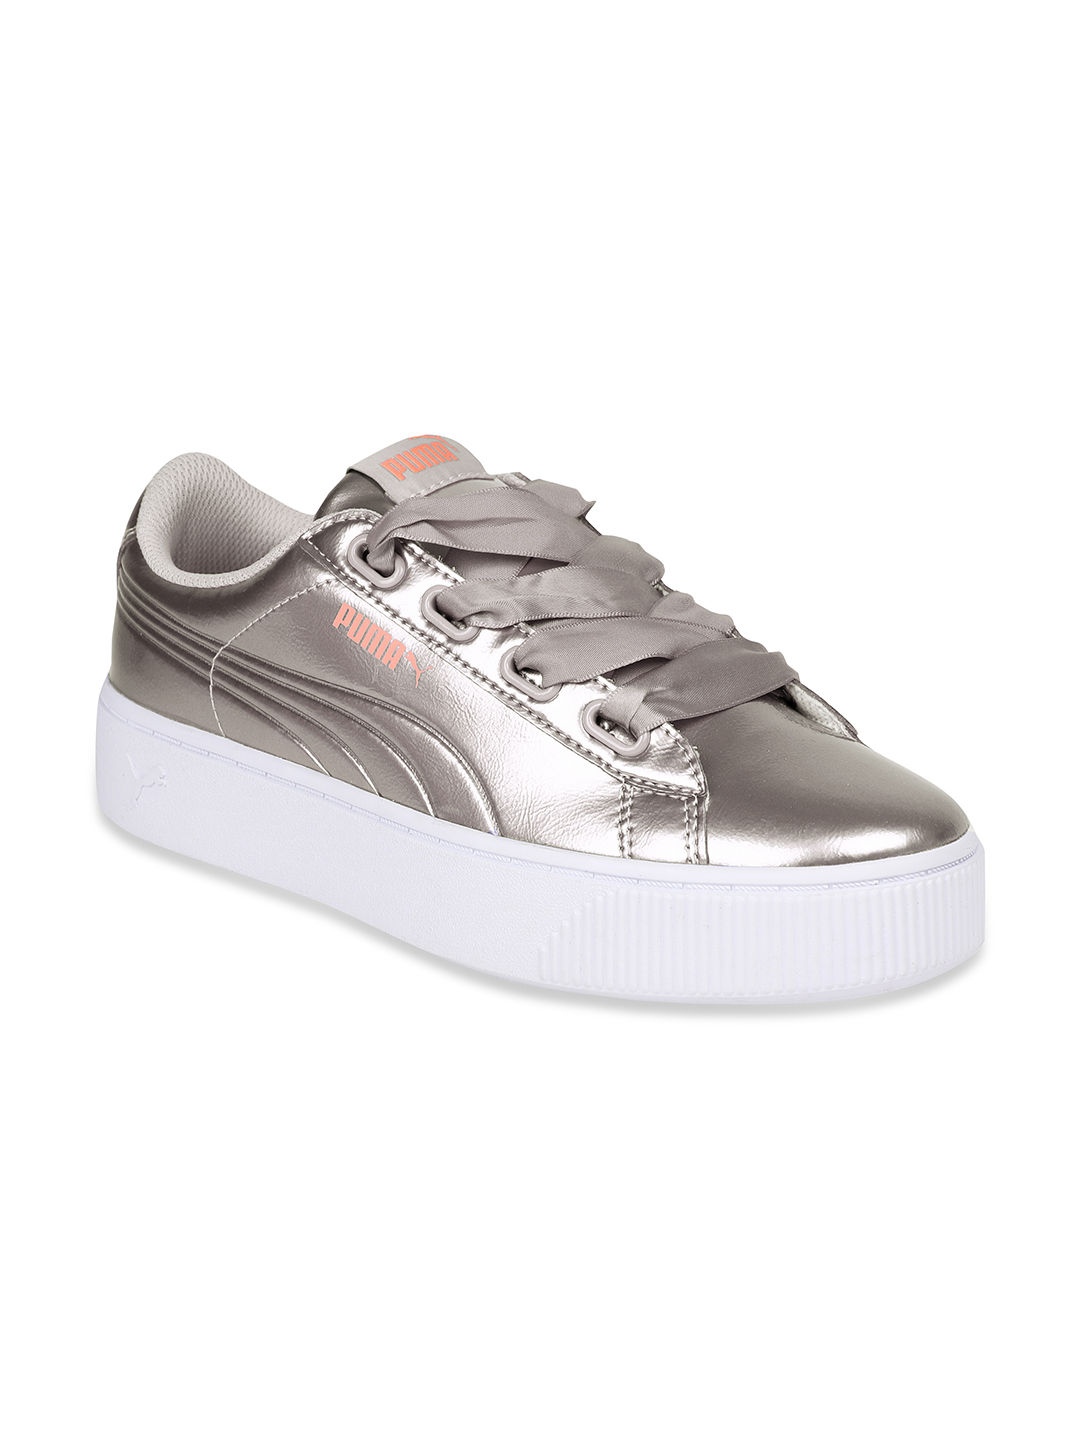 bestellen trog vliegtuig Puma Vikky Stacked Ribbon P Women Casual Shoes - Silver (4): Buy Puma Vikky  Stacked Ribbon P Women Casual Shoes - Silver (4) Online at Best Price in  India | Nykaa